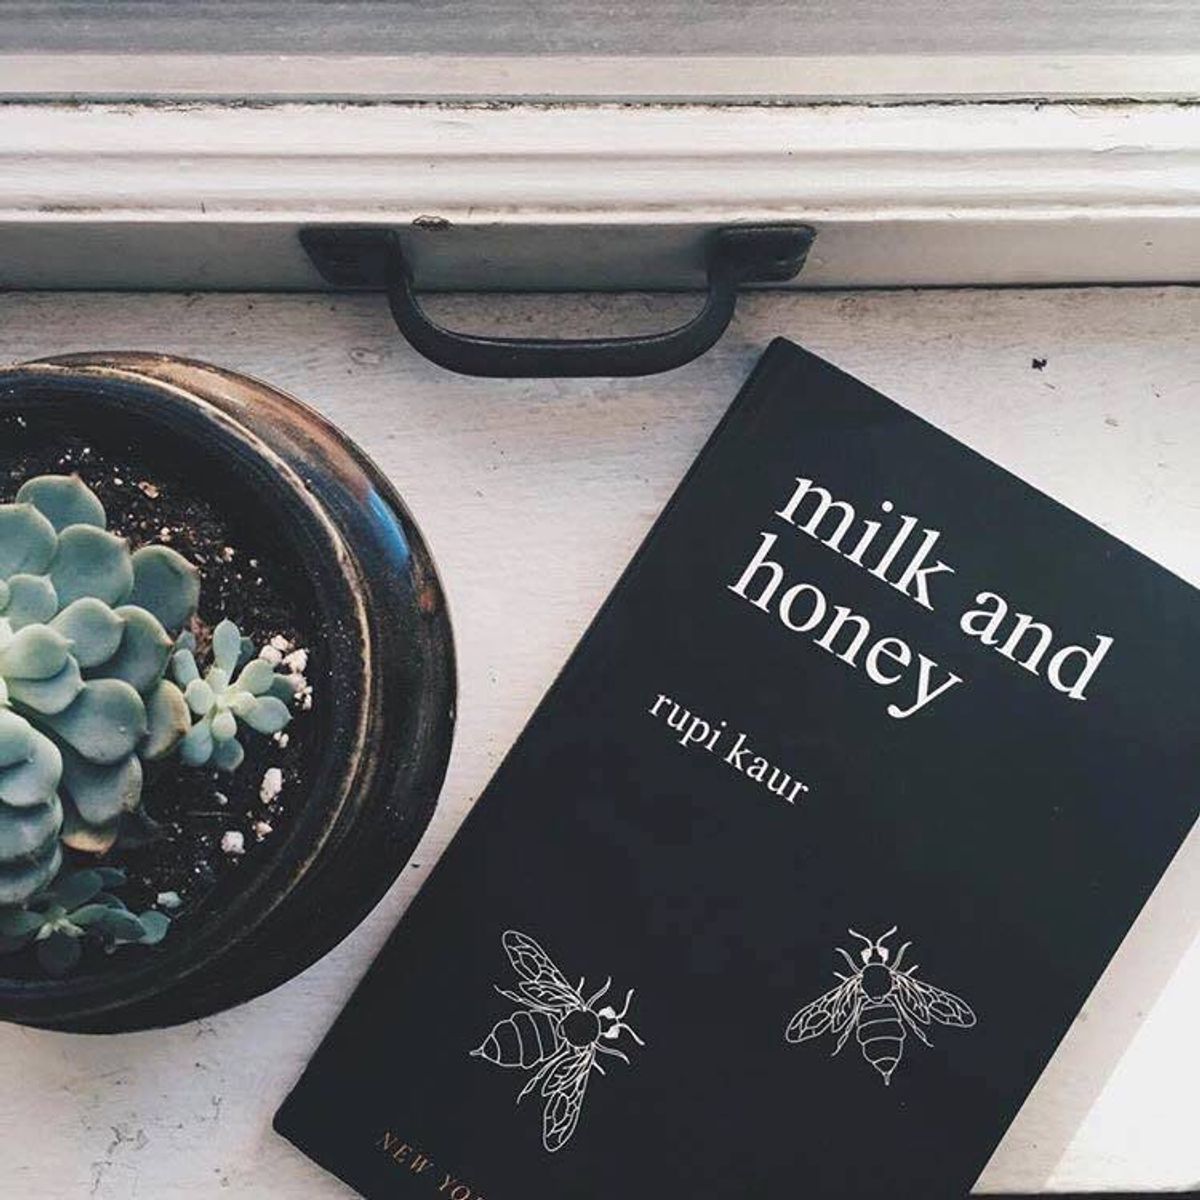 Why Every Woman Should Read "Milk and Honey"